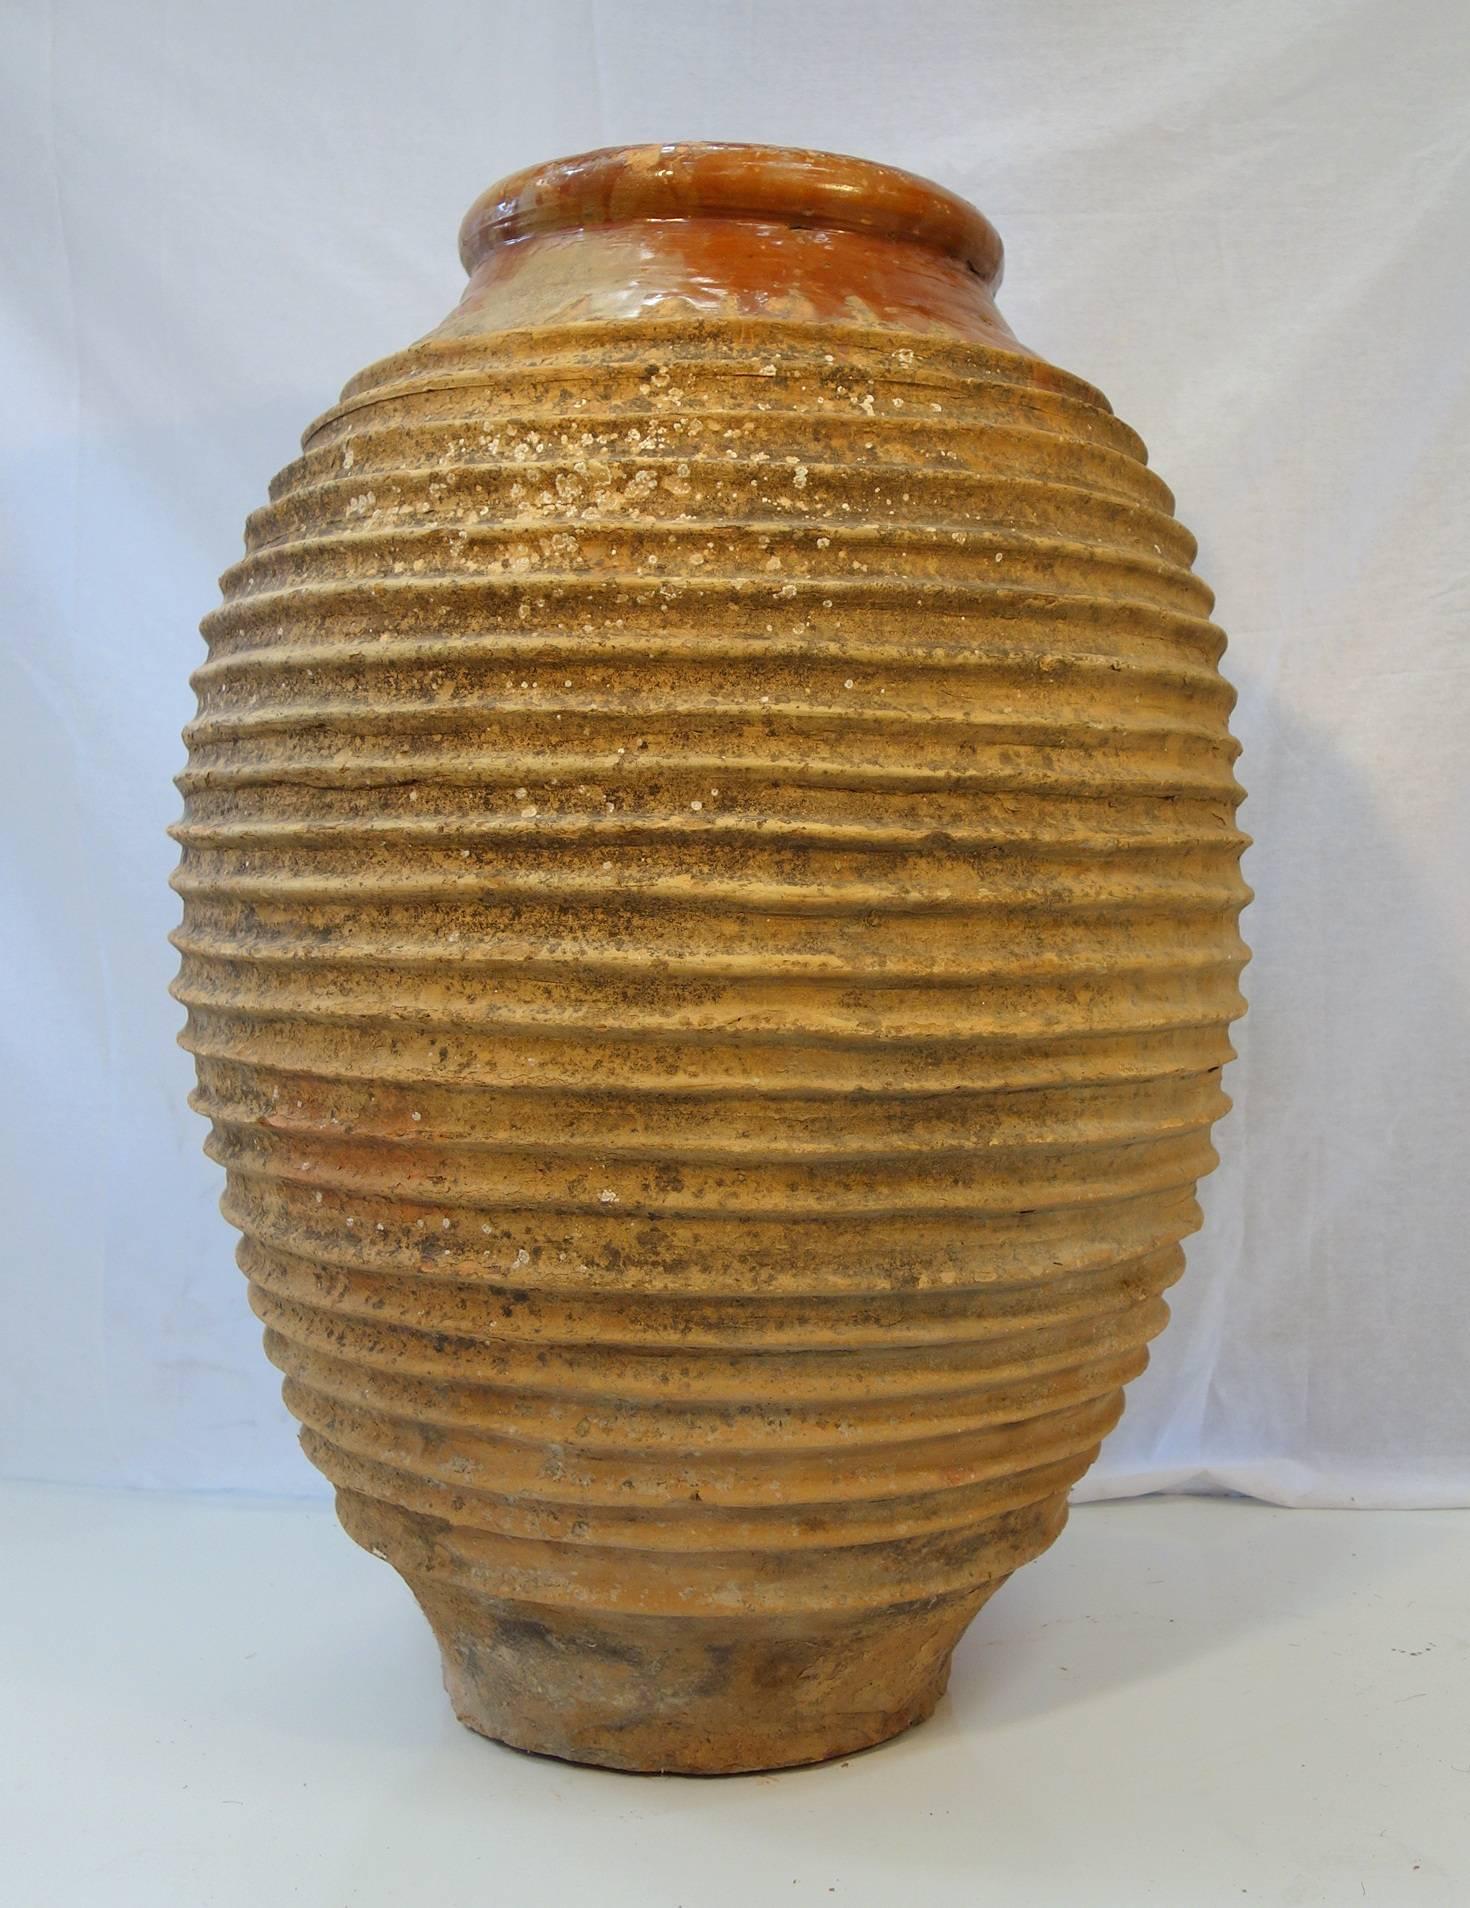 Peloponnesian Koroni jar naturally weathered into a beautiful patina with lichen. Around the top neck the clay present some beautiful ocra orange glaze.
Typical 